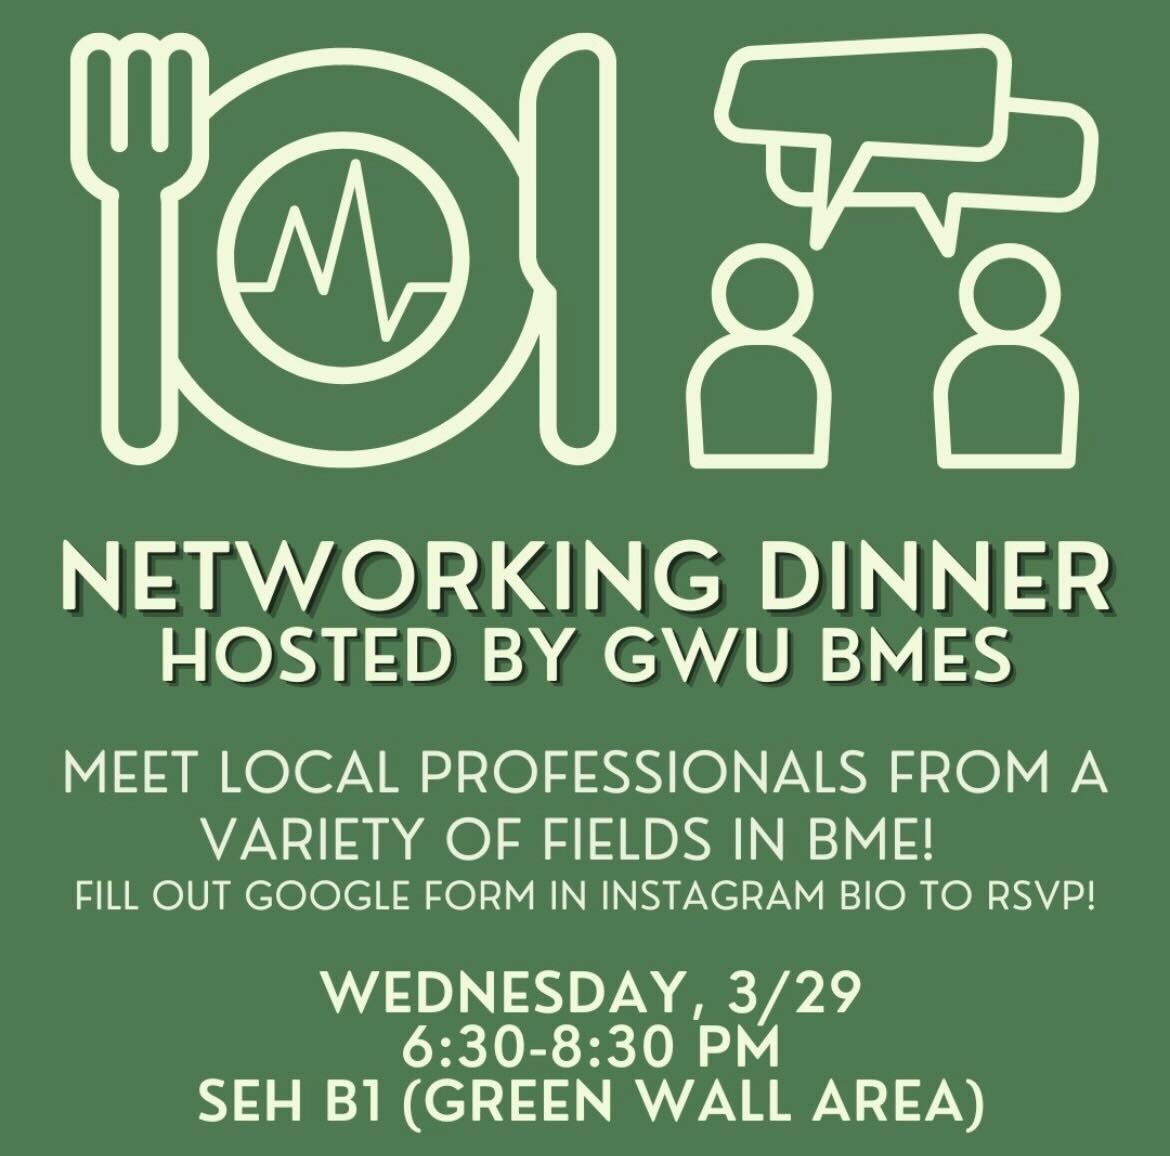 Networking Dinner Hosted by GWU BMES Flyer